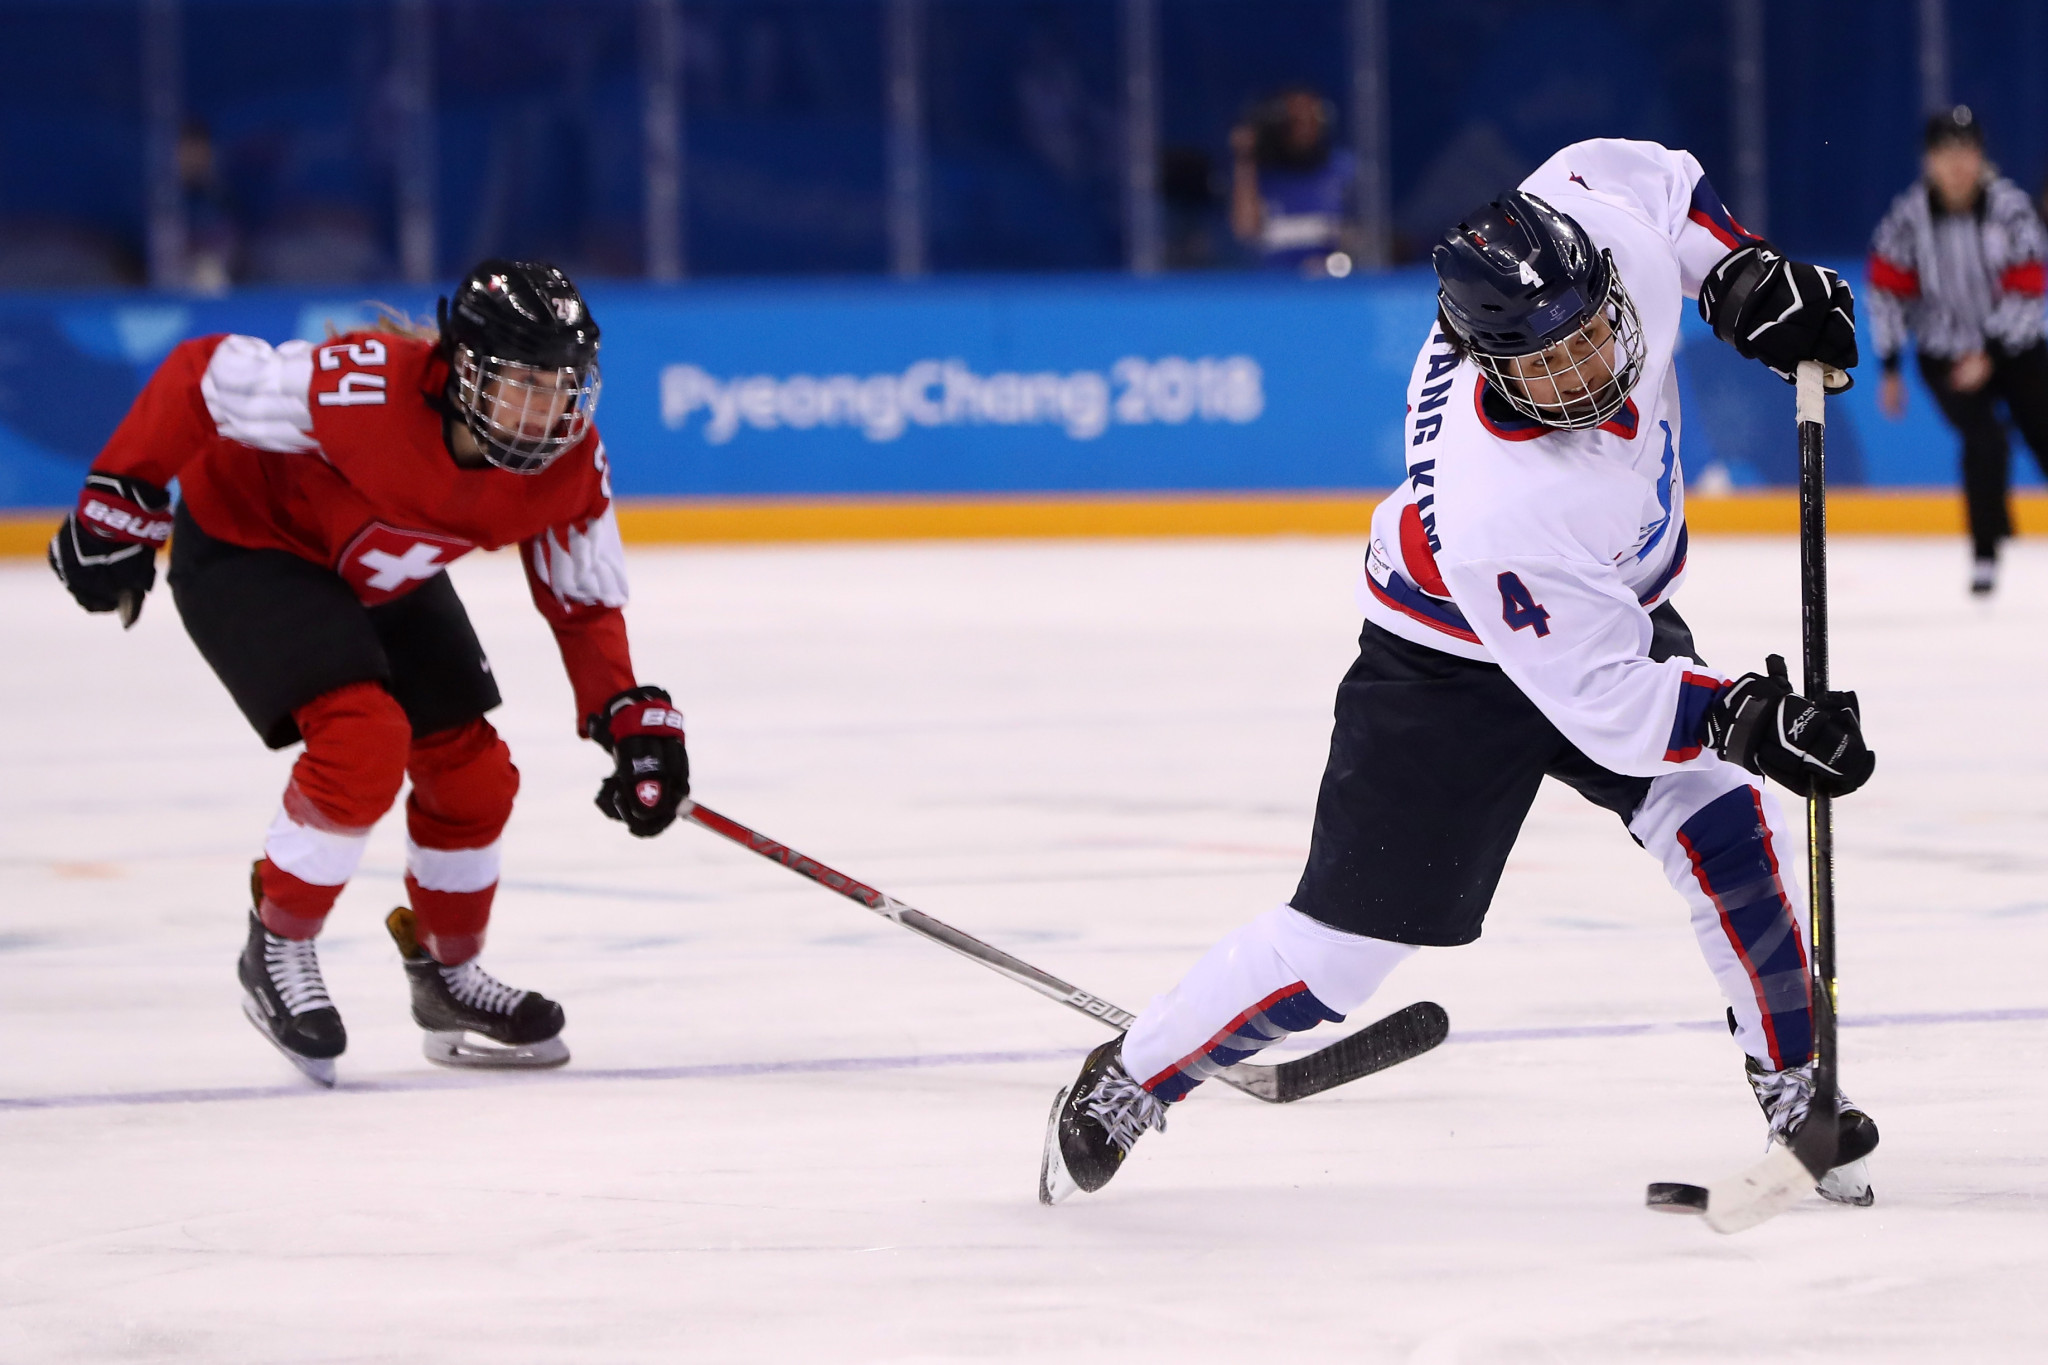 WADA decide against appealing decision to clear North Korean ice hockey player of doping offence at Pyeongchang 2018